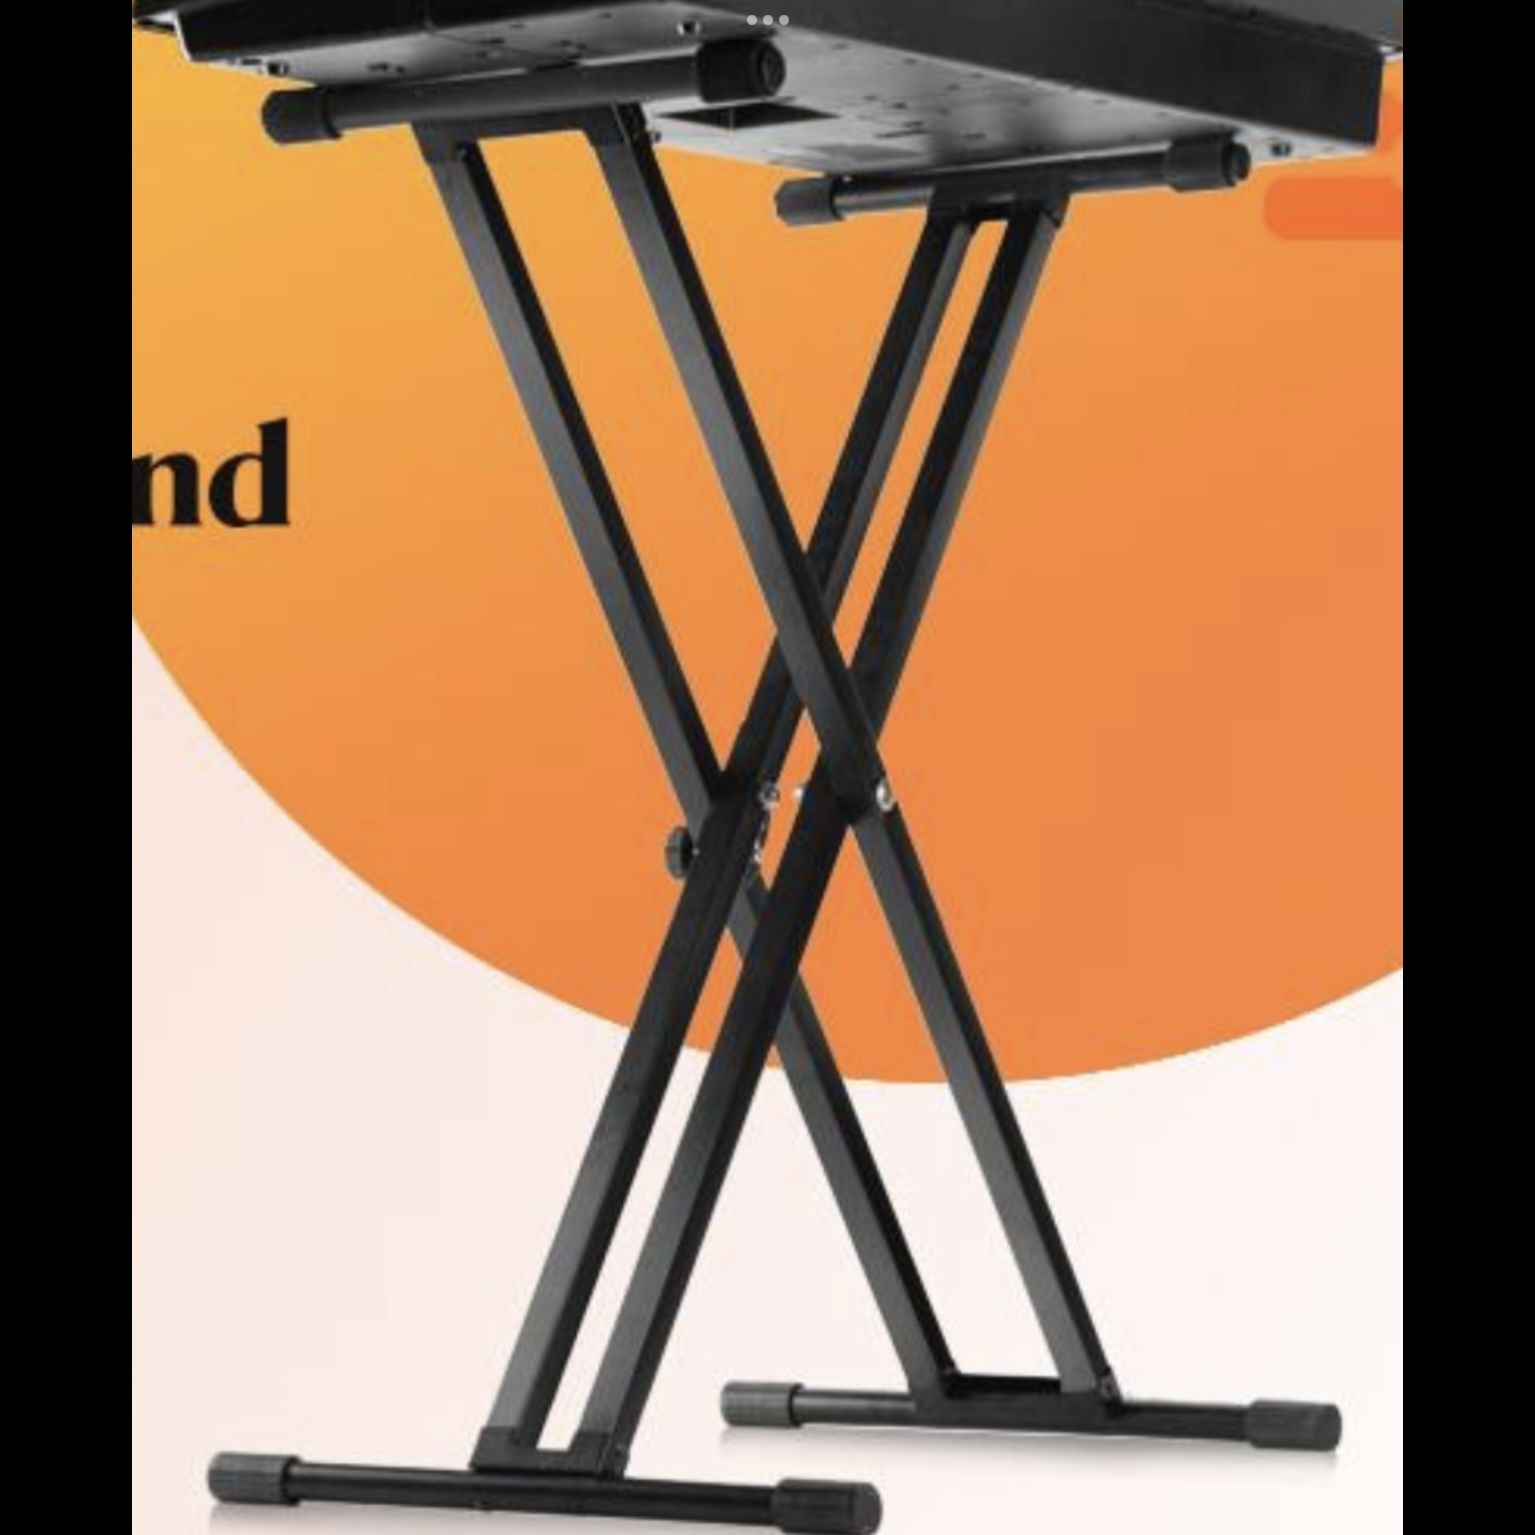 Adjustable Keyboard Stand,  X Style Digital Piano Stand with Locking Straps for 61 76 88 Keys 